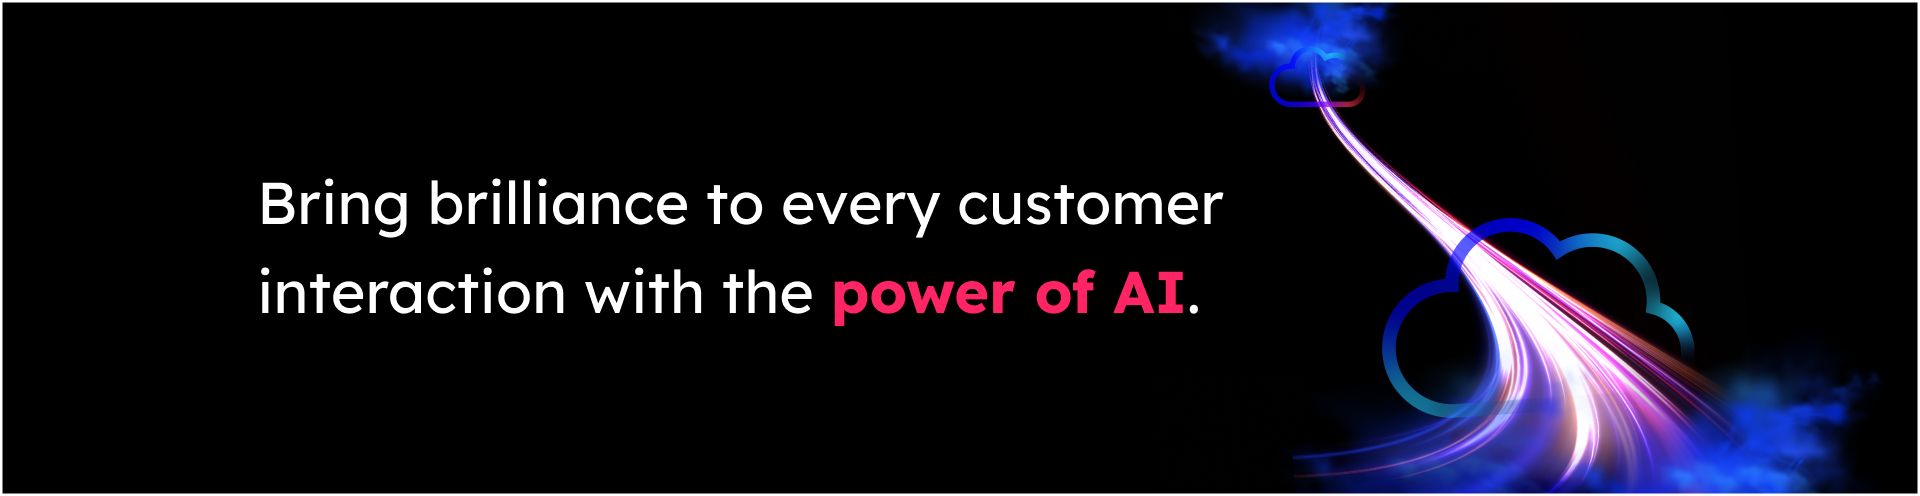 Bring brilliance to every customer interaction with the power of AI